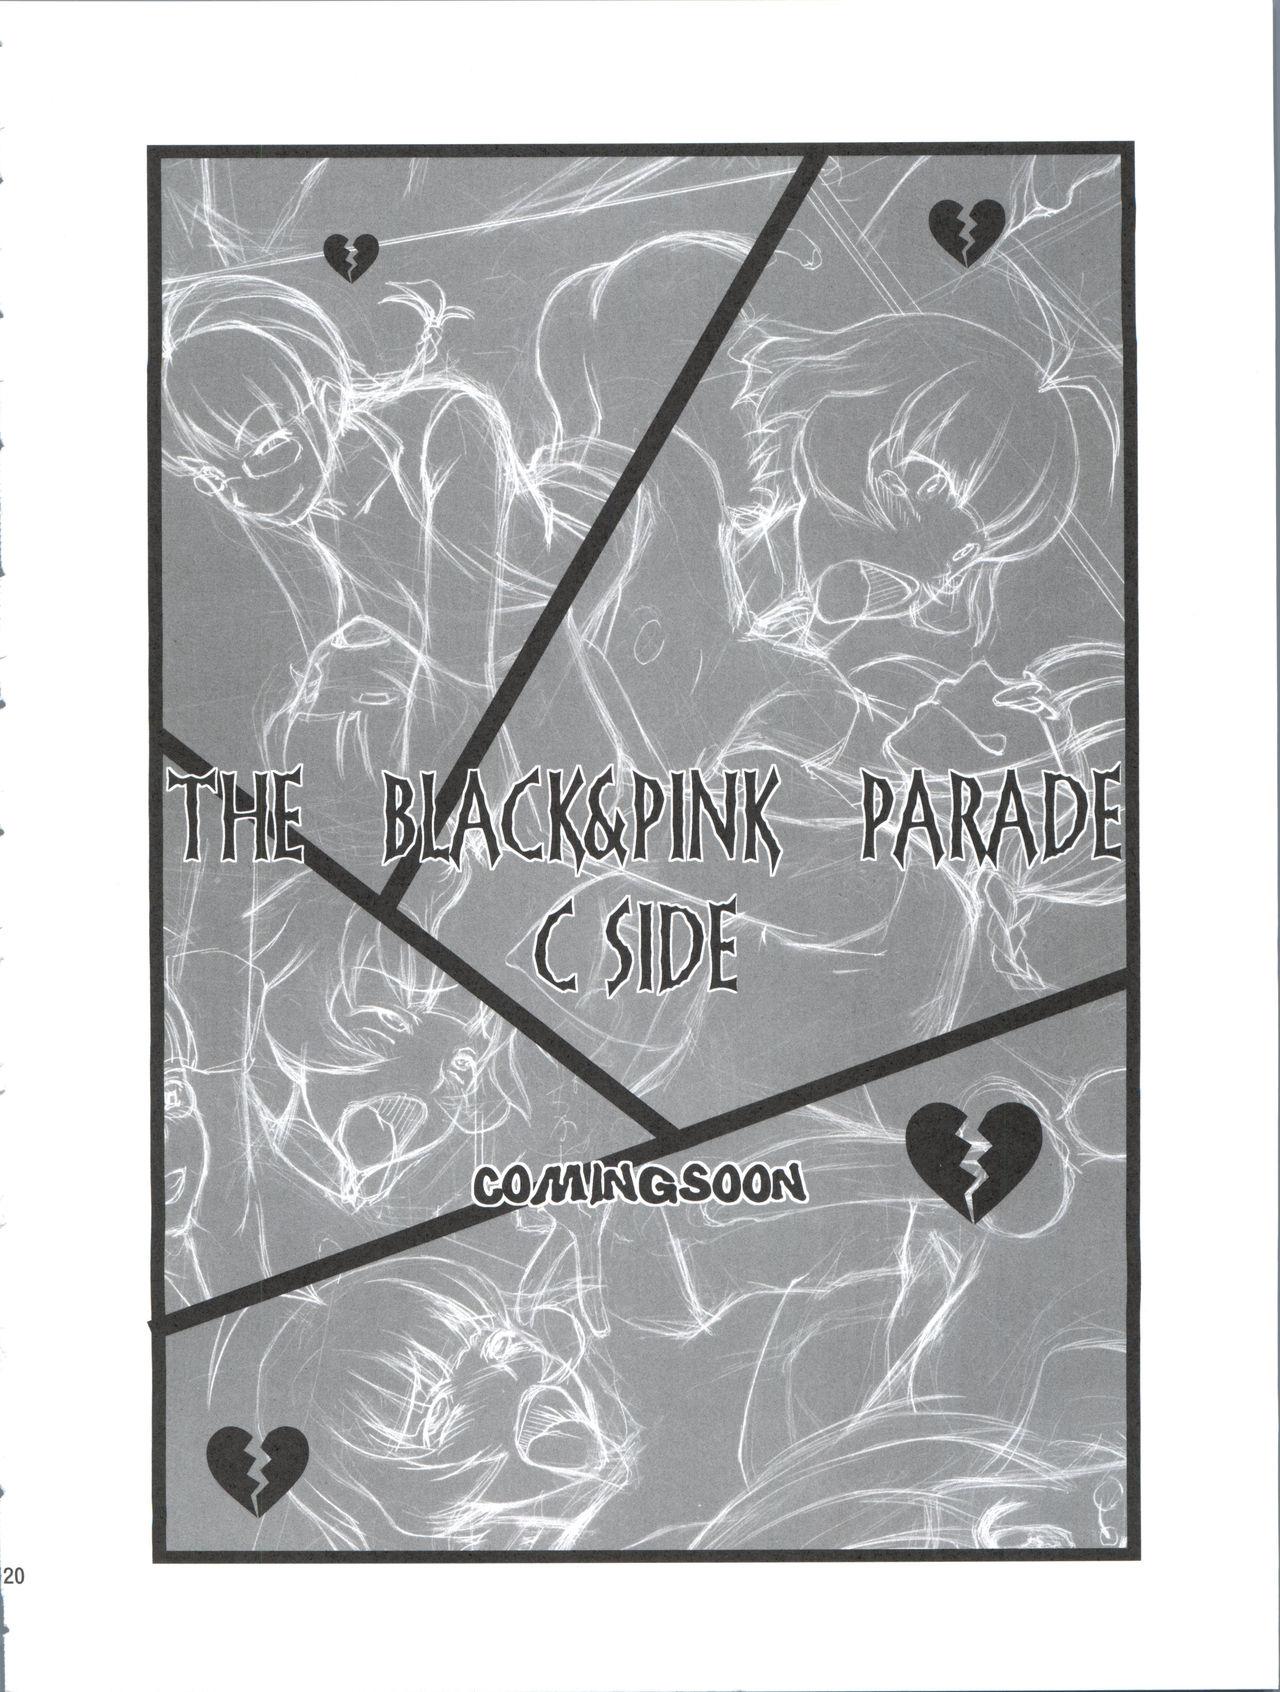 The Black & Pink Parade B-Side 18